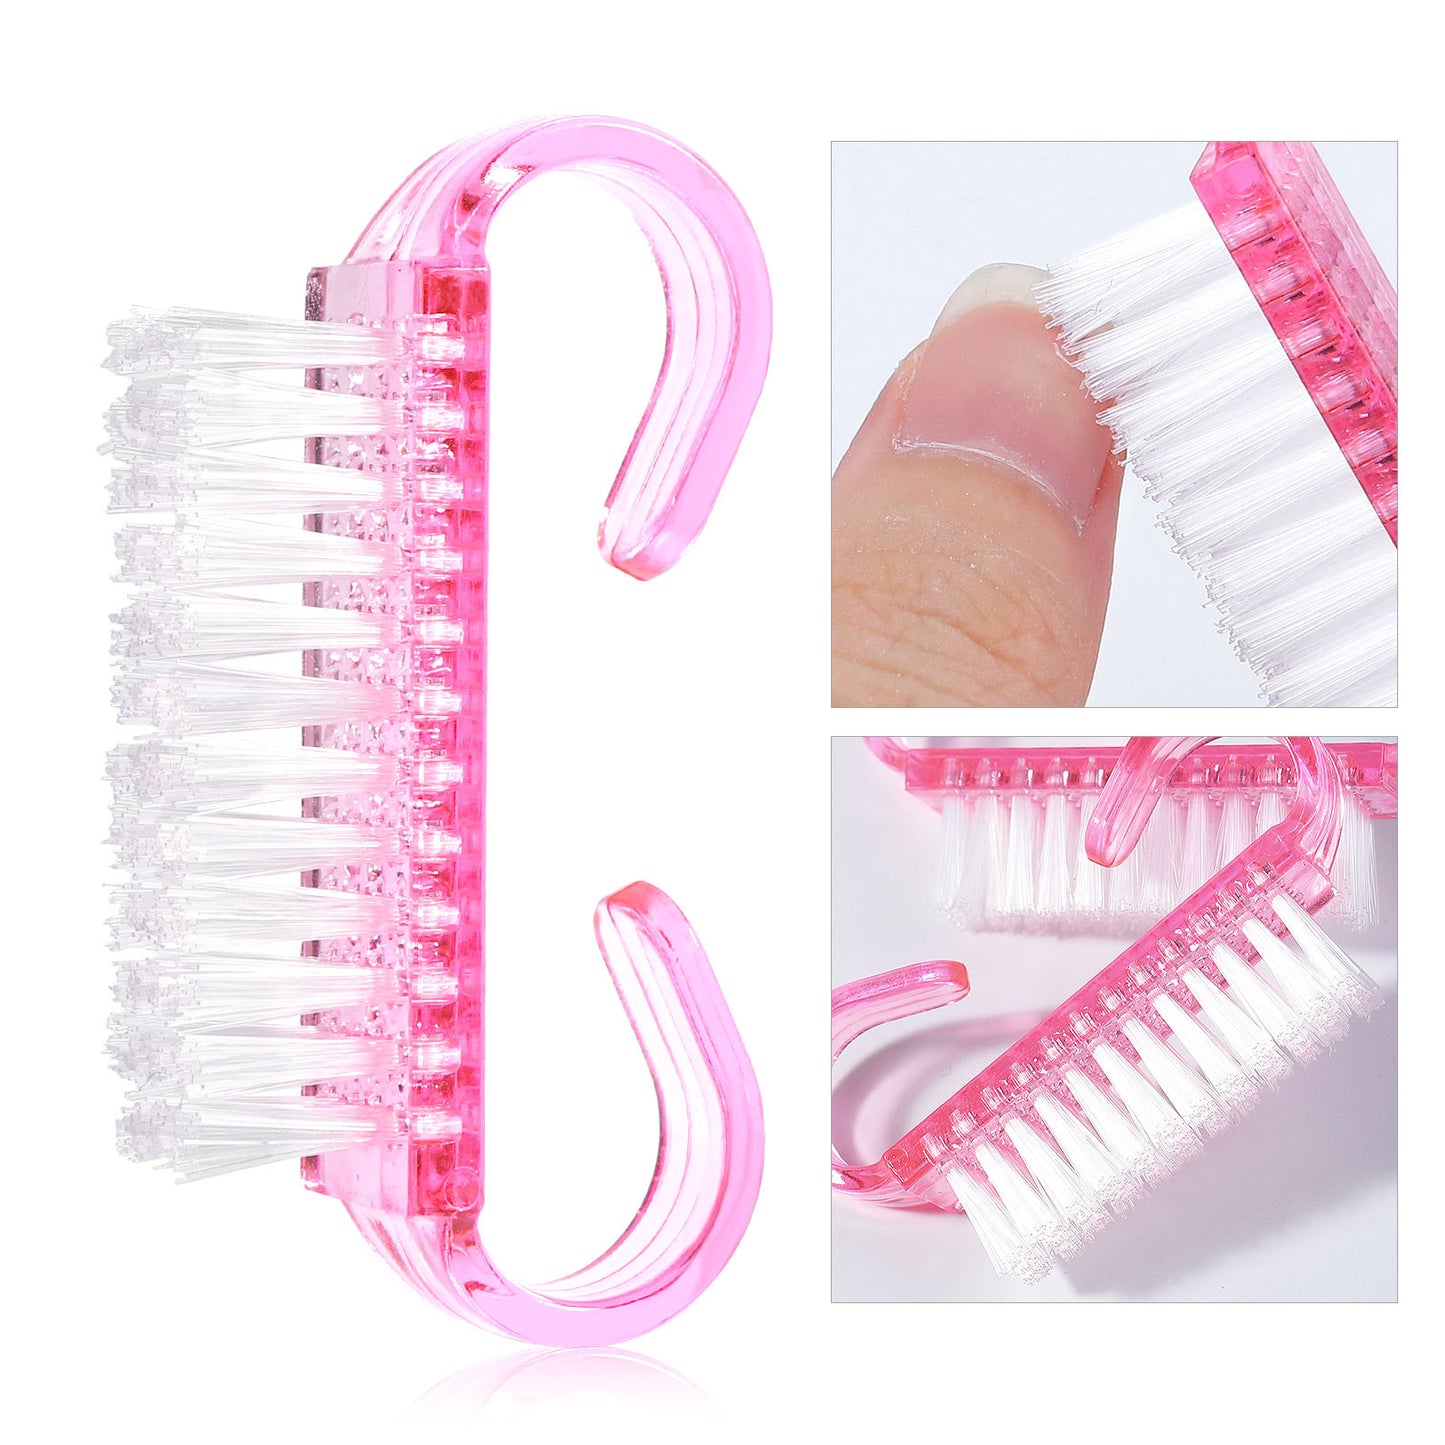 1 Pcs Soft Remove Dust Plastic Cleaning Nail Brushes Pink Color –  mjfbeautyshop